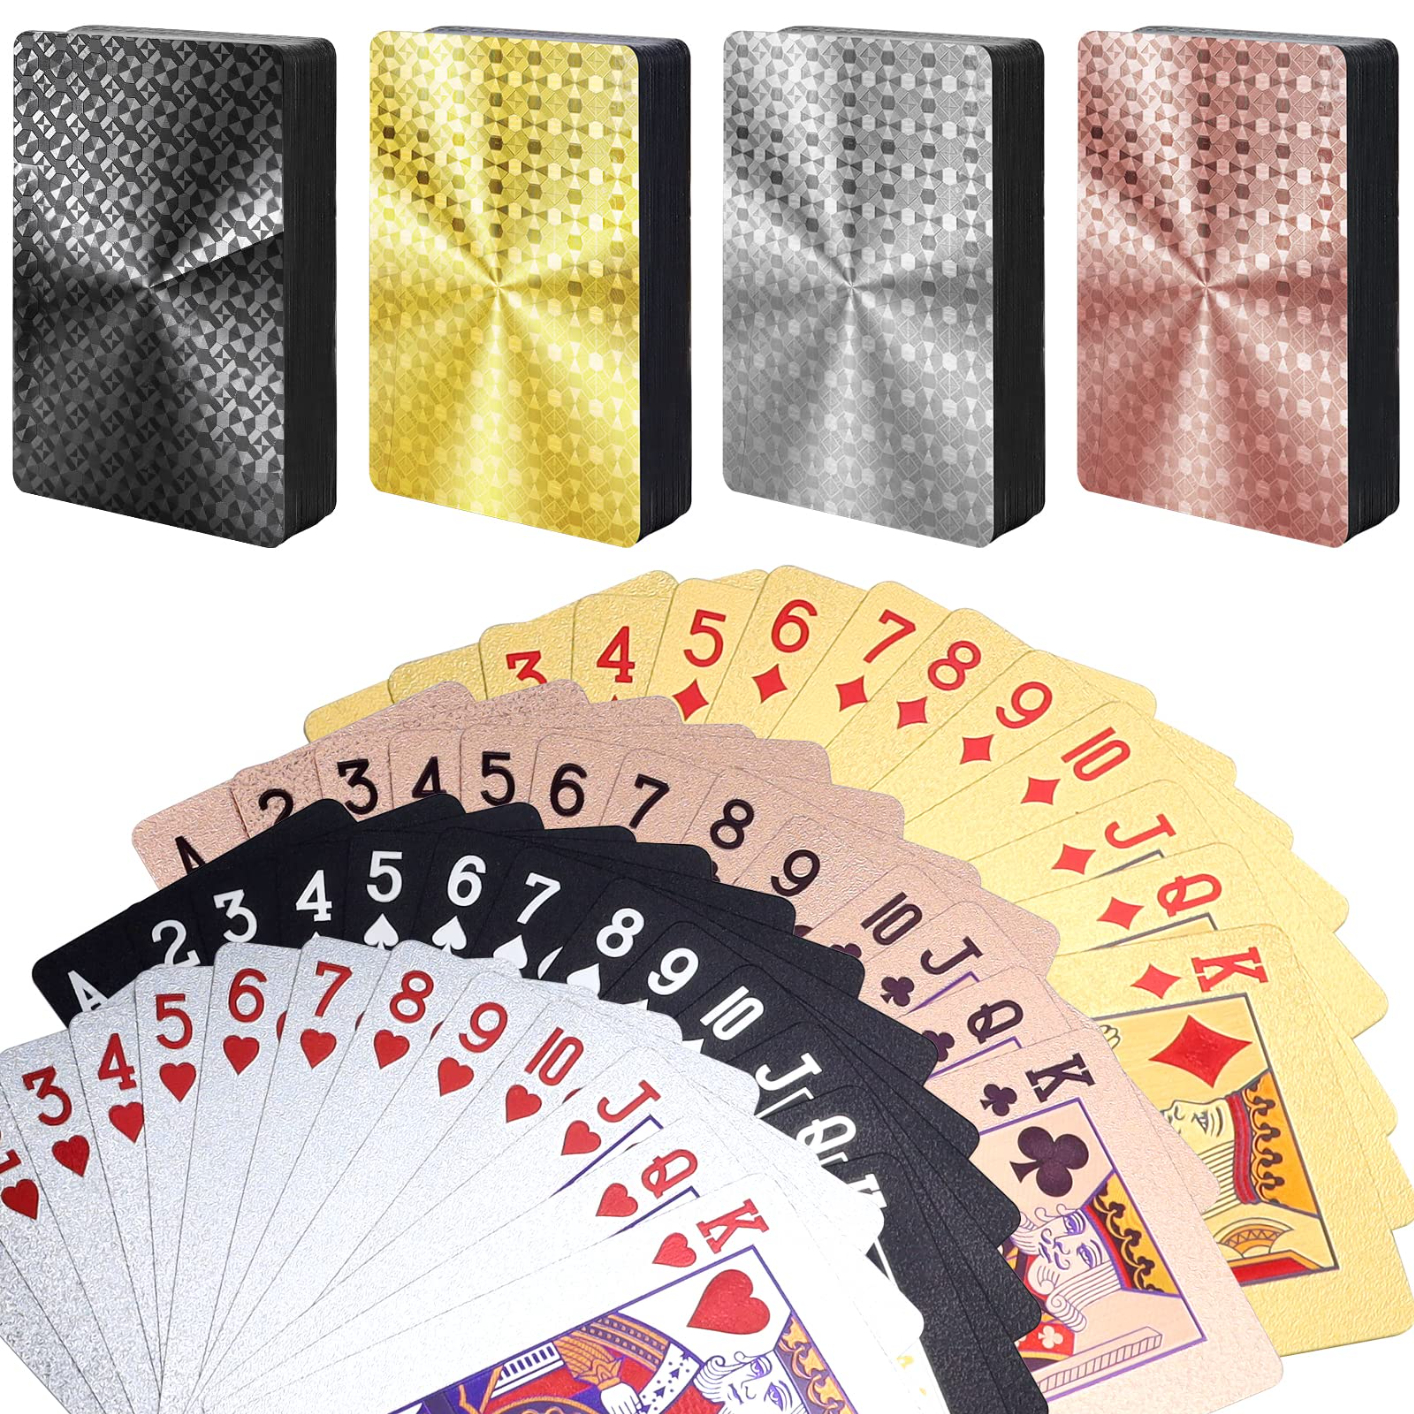 ND-PK-0079 Playing Cards Foil Poker Cards,Waterproof Plastic Foil Poker Cards,Diamond Foil Poker Cards Gold for Adults, Party Gift,Travel and Classic Family Card Game